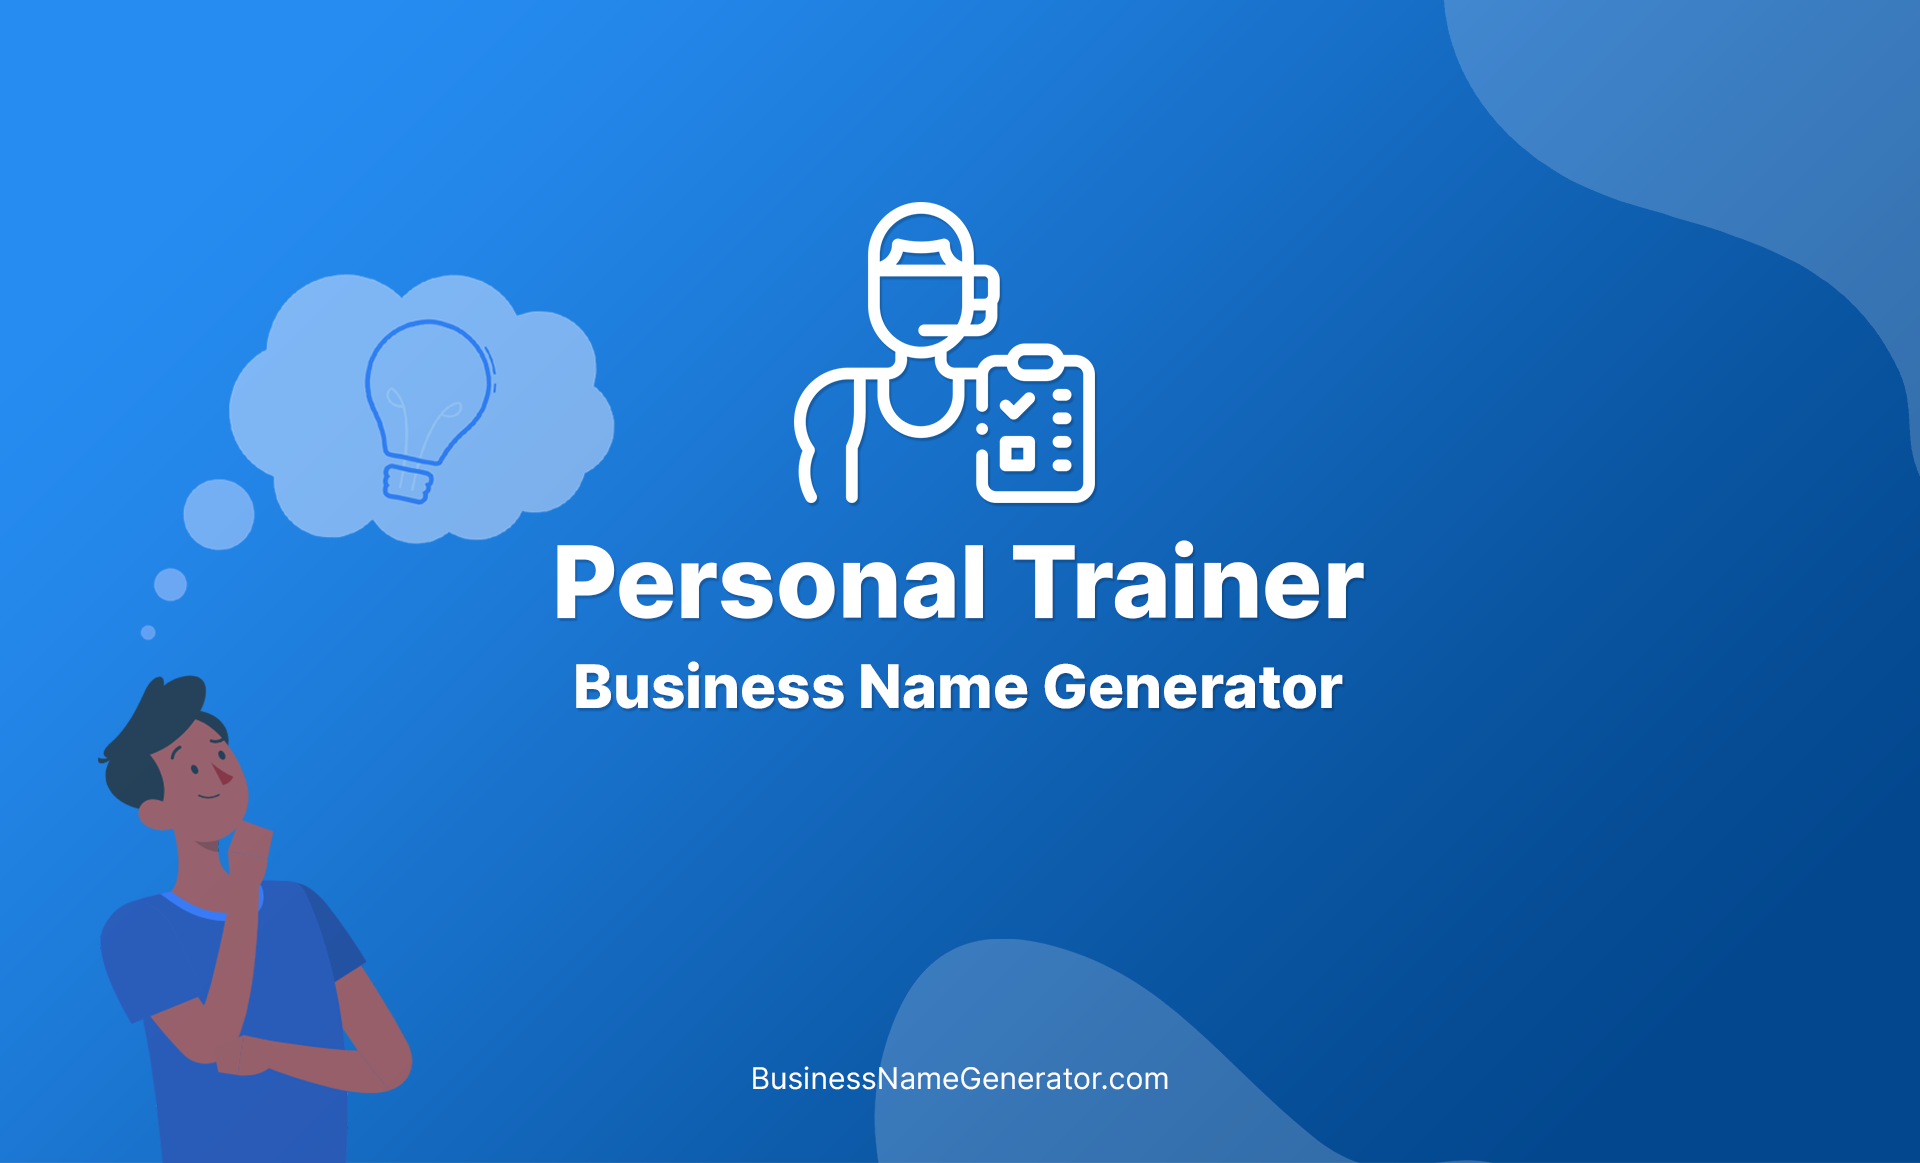 Personal Trainer Business Name Generator